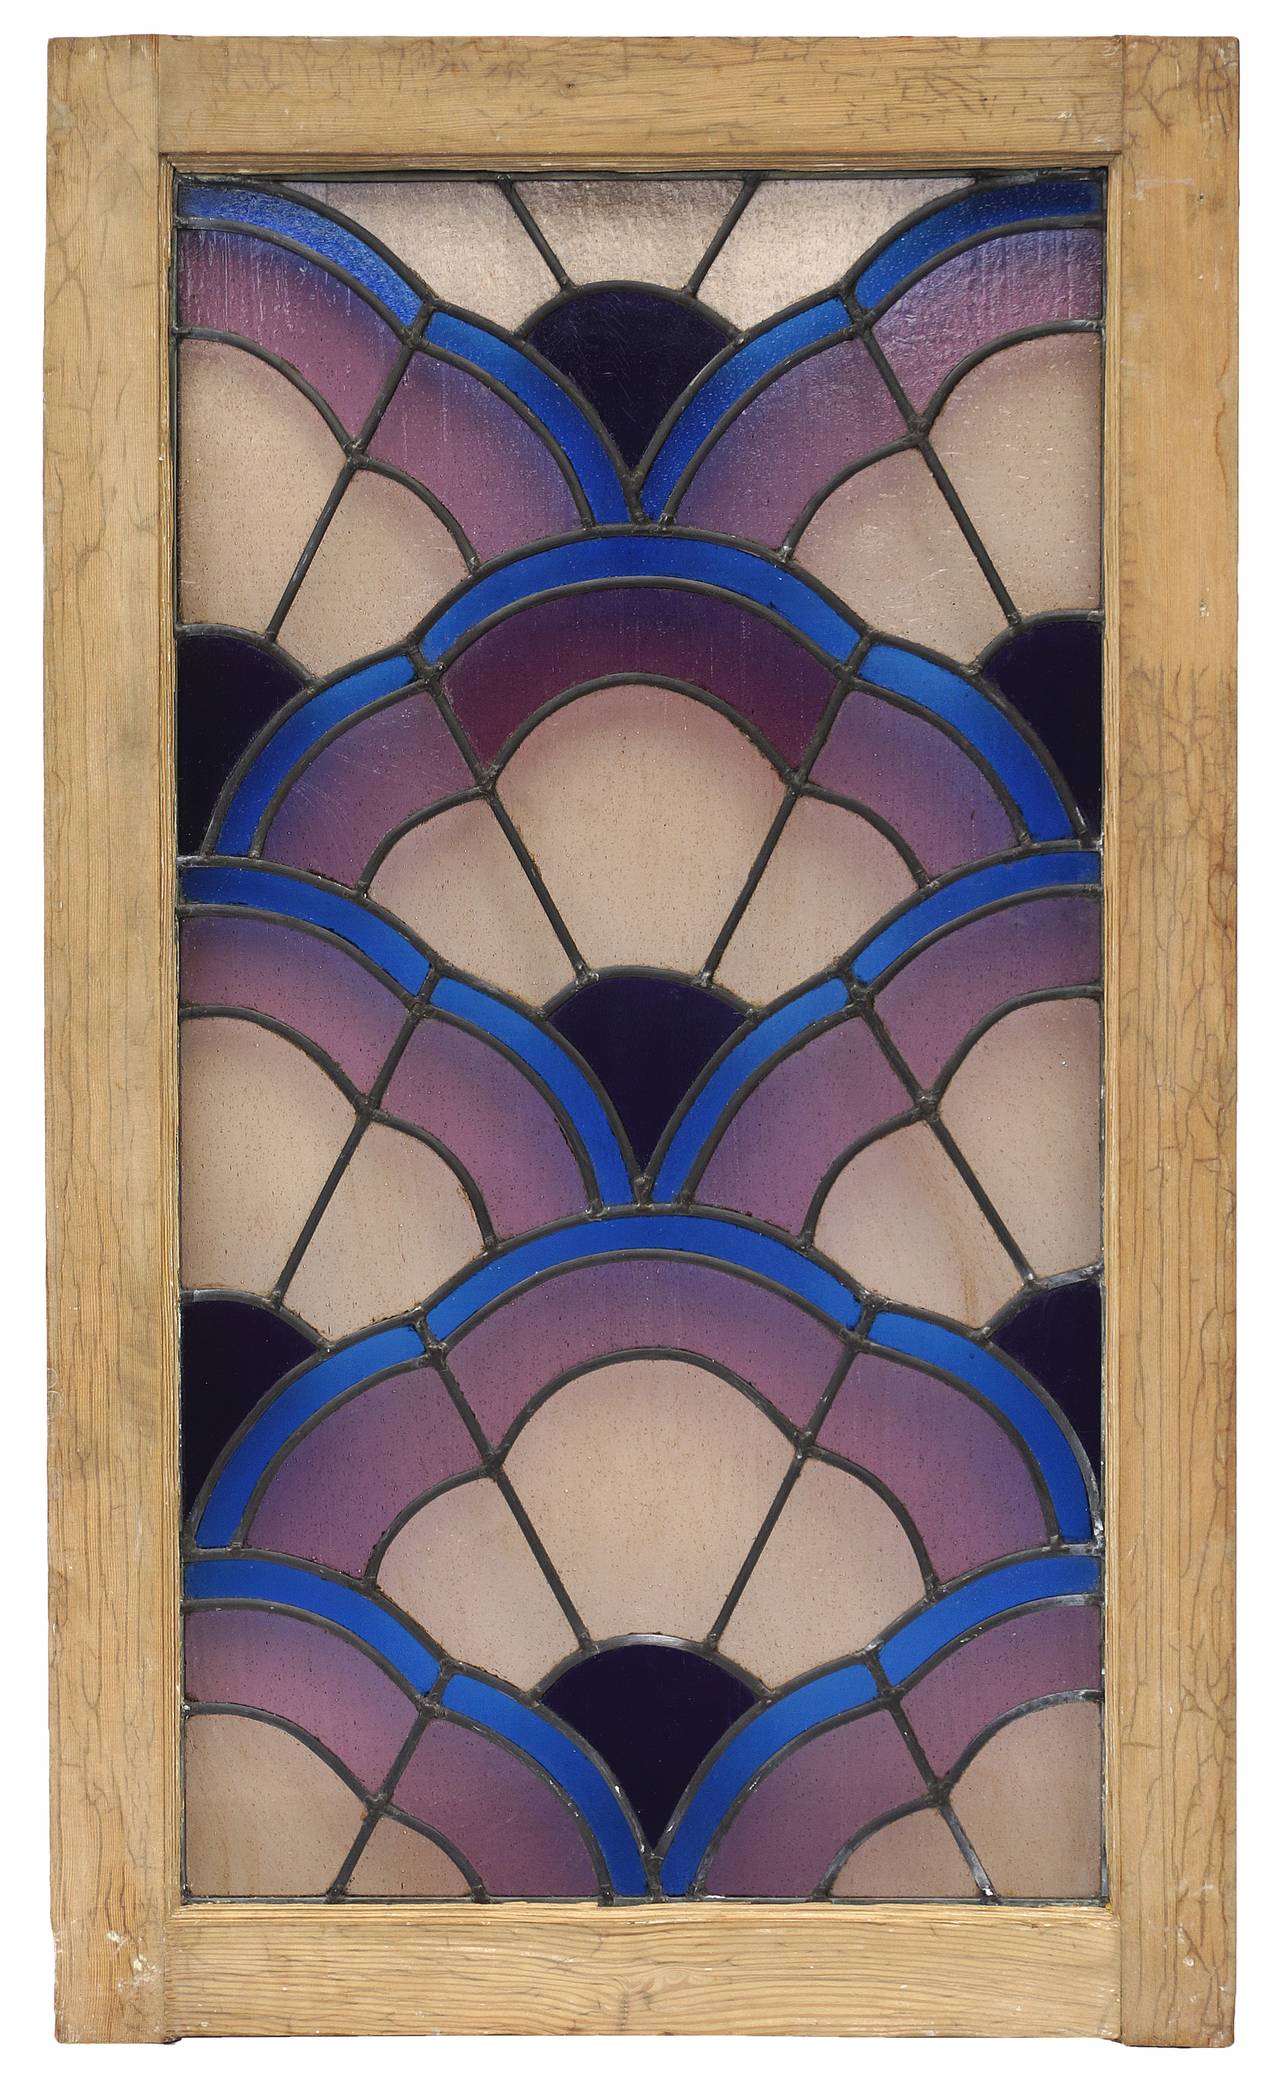 Italian Art Deco stained glass window panel having overlapping polychrome scale motif in the original wood frame, circa 1930. There is a minor crack in the lower purple side panel, please see last photo.